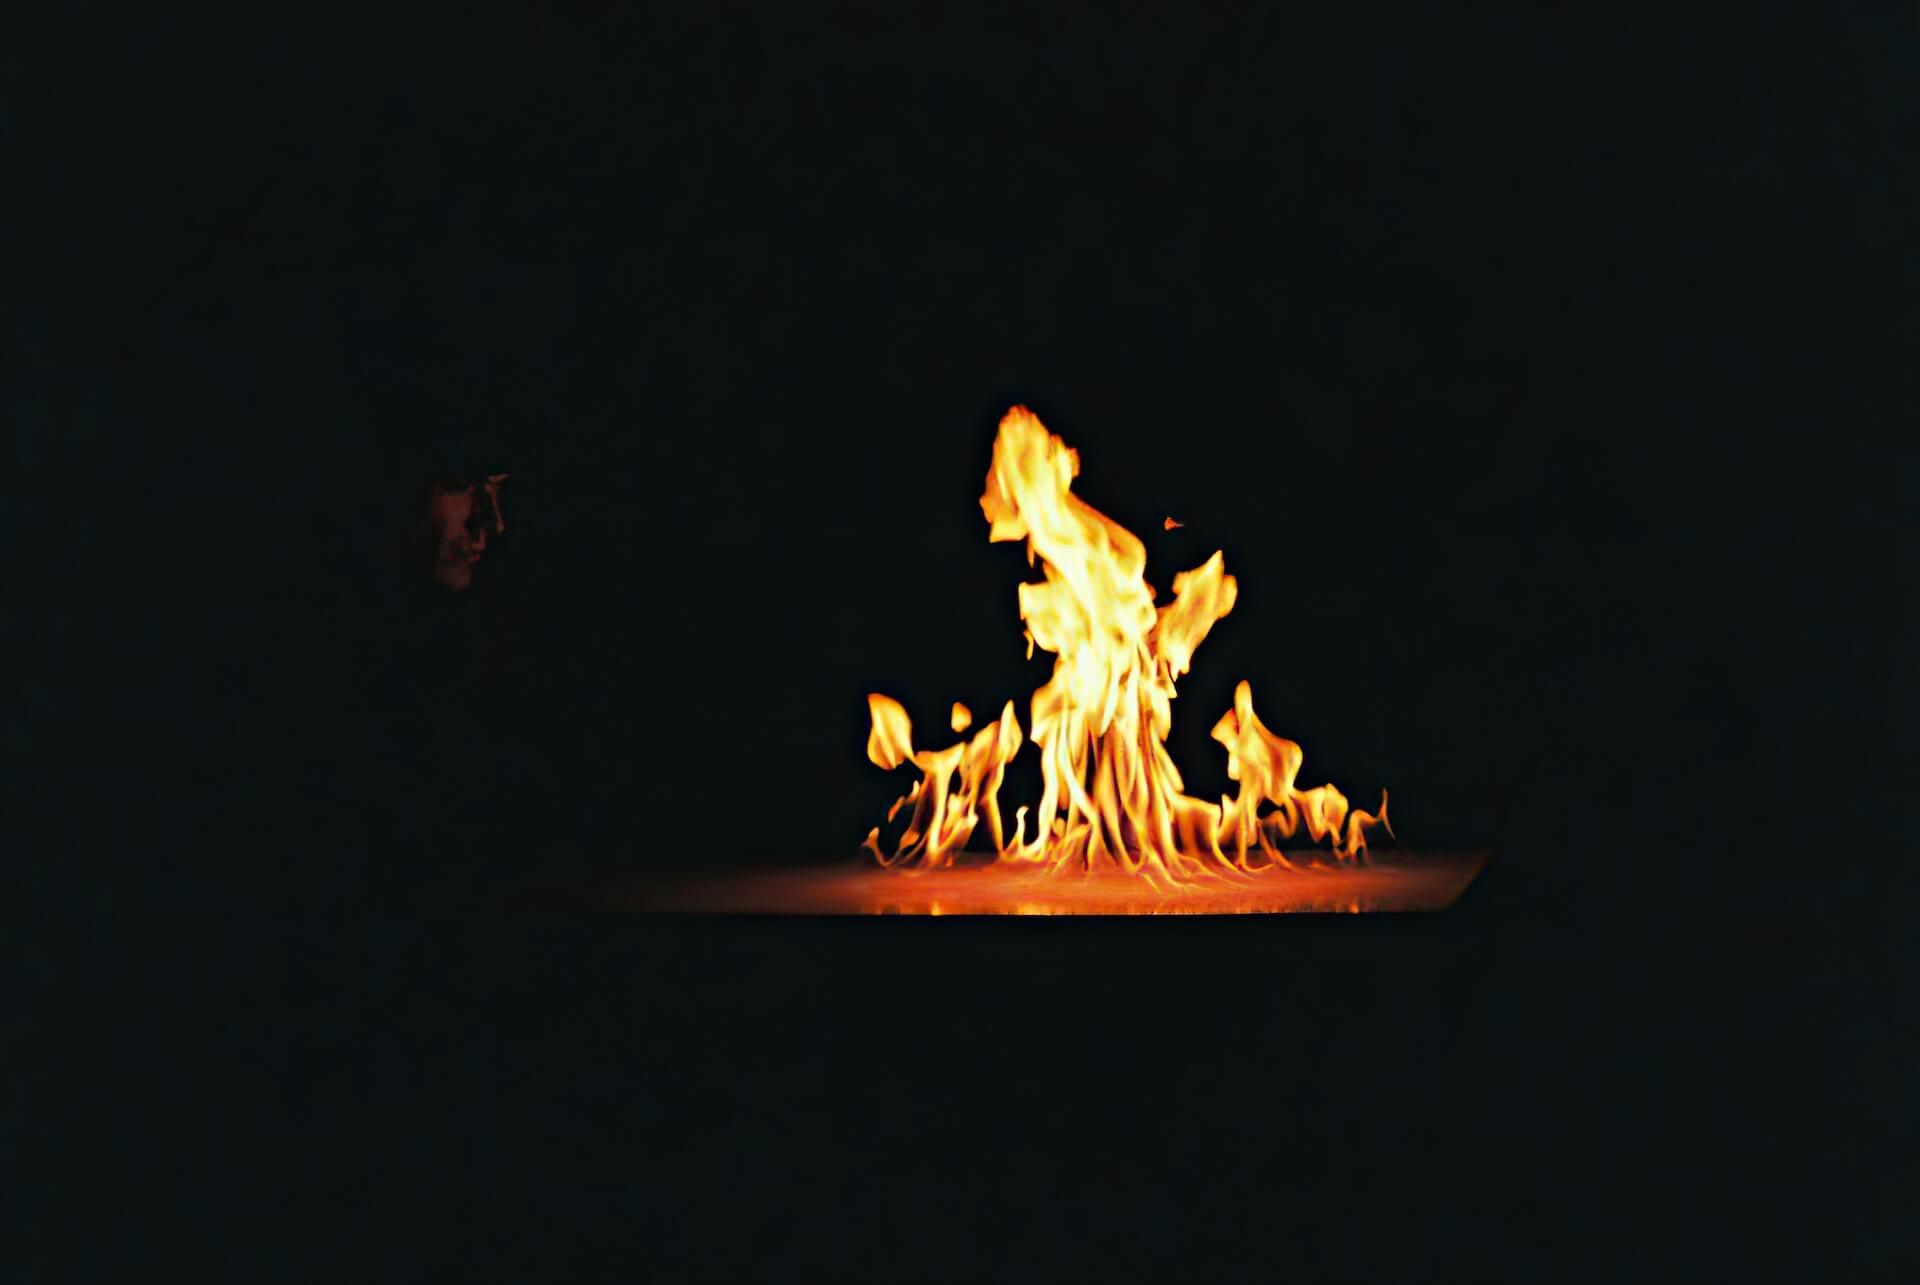 A person gazing in a fire